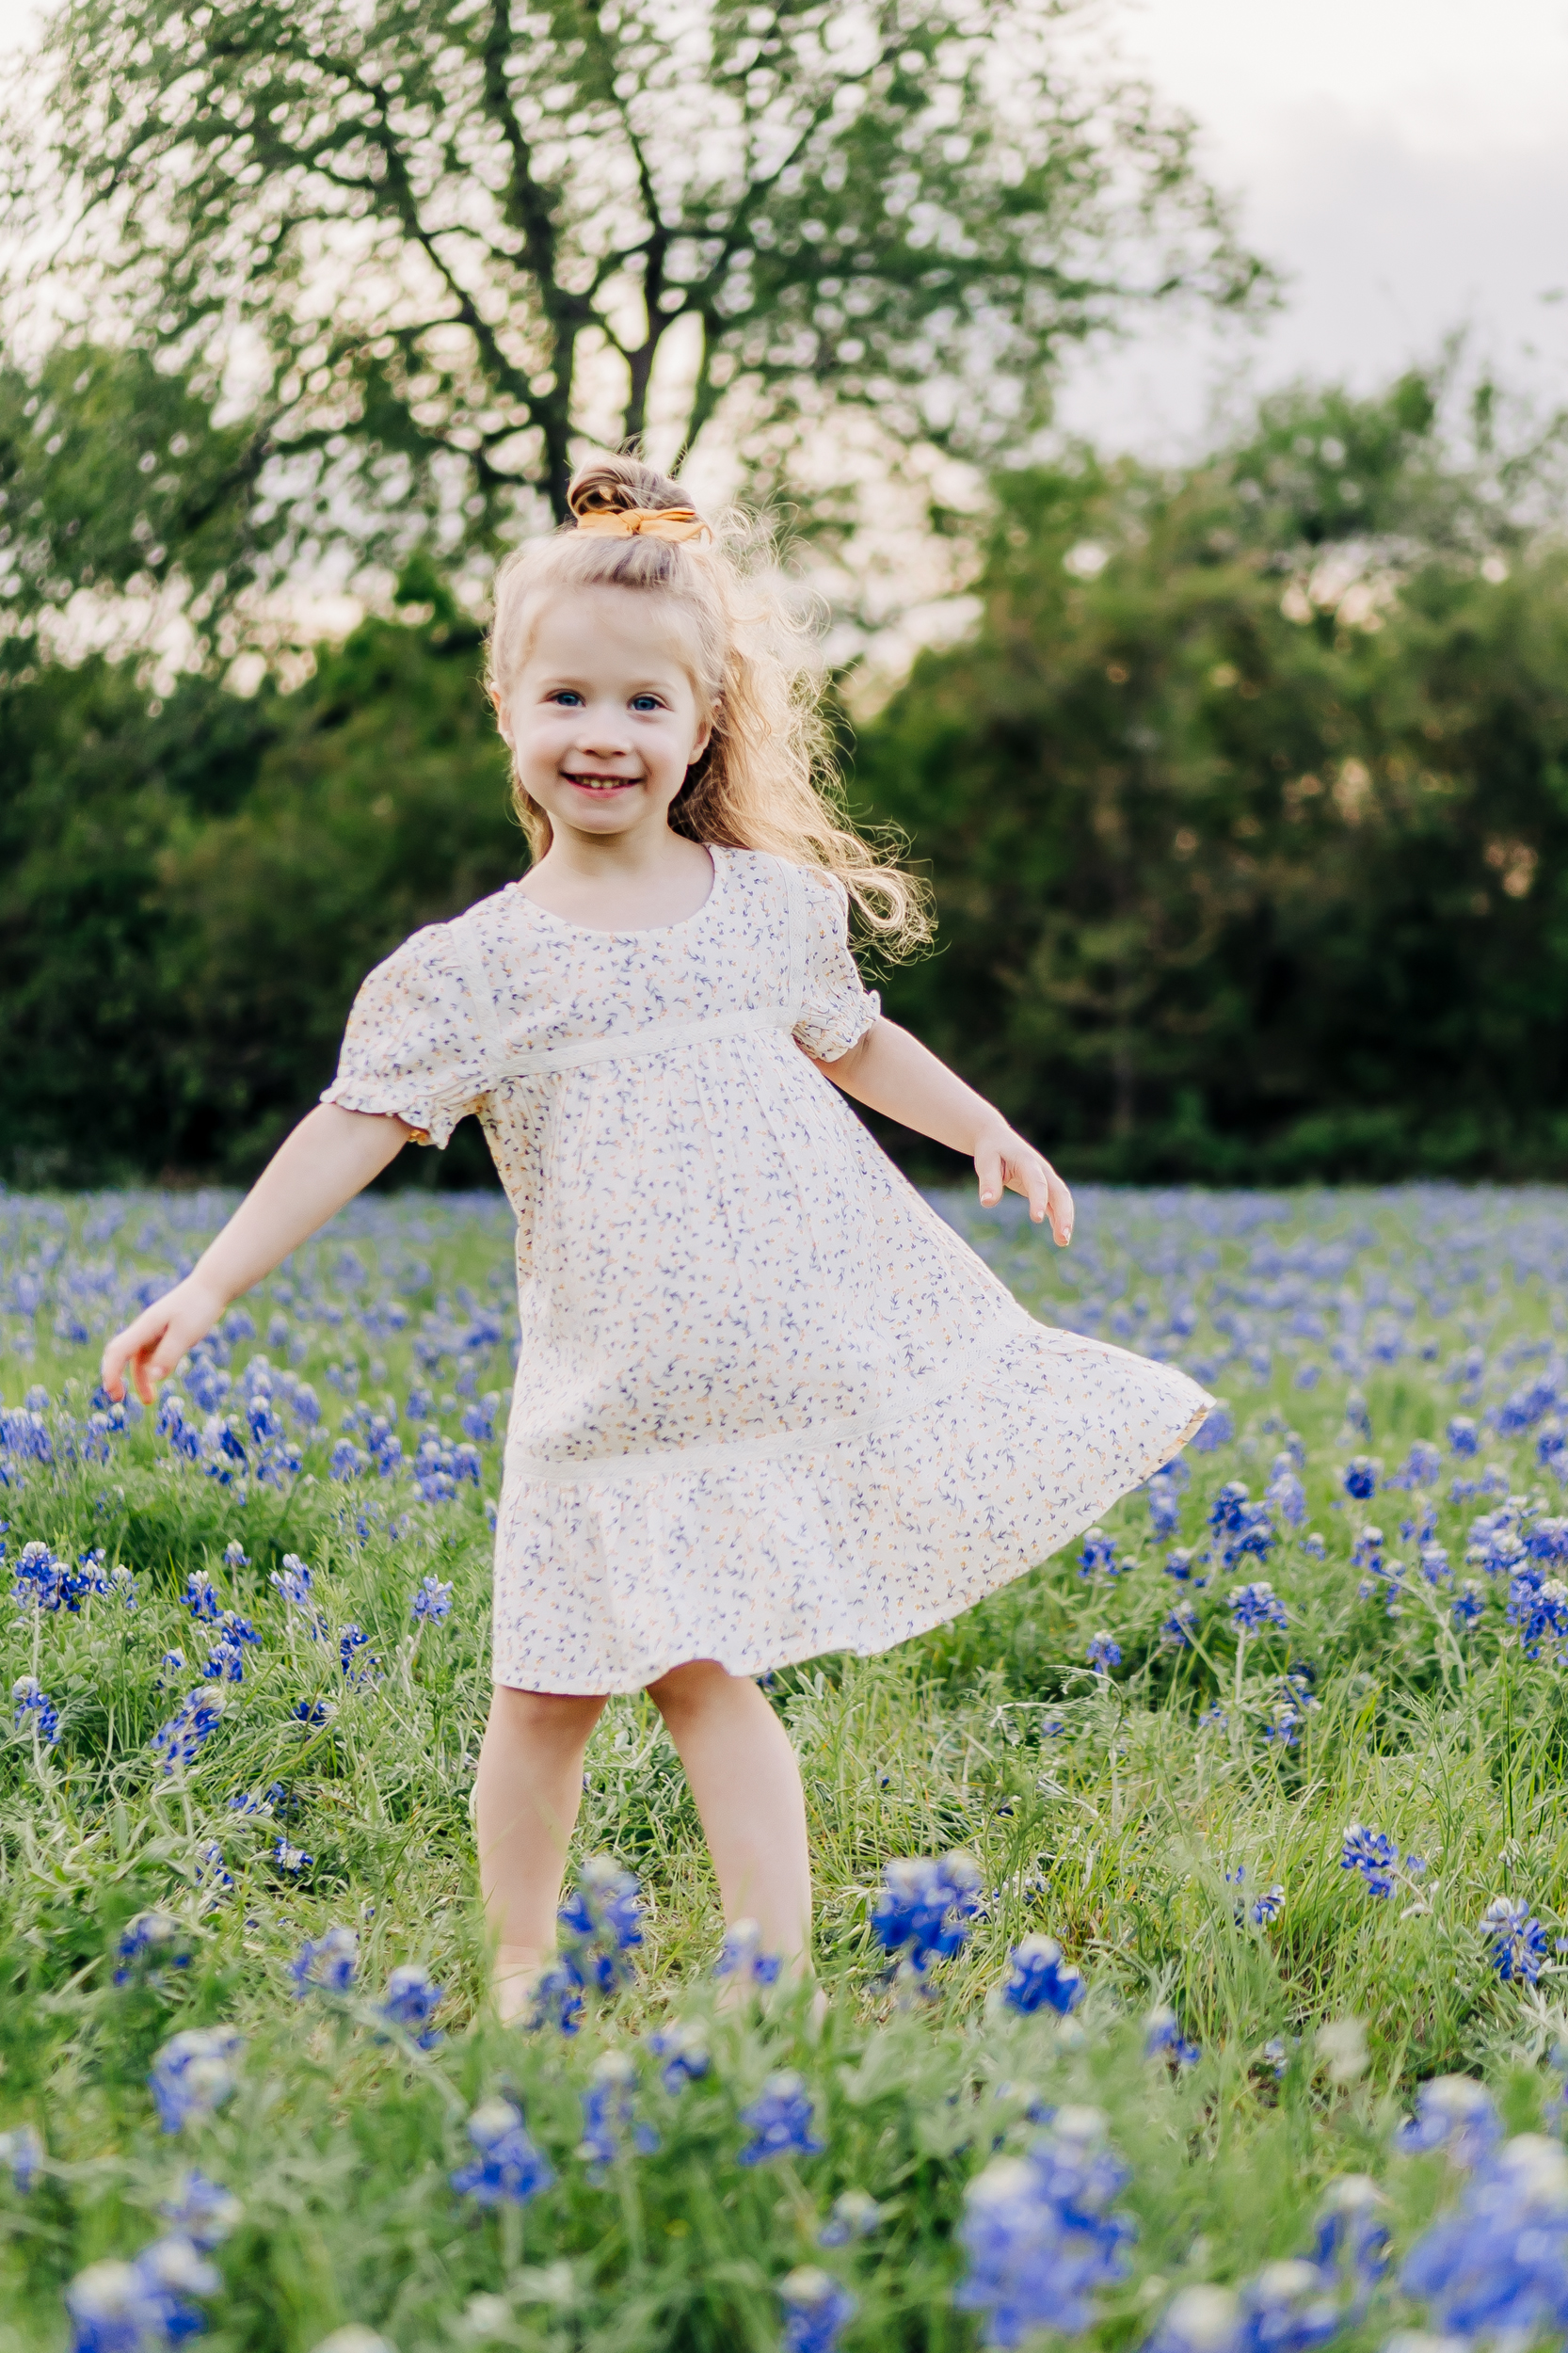 Bluebonnet mini sessions
How to get your child to behave for photos | Plano, Texas Family Photographer | via brittnierenee.com